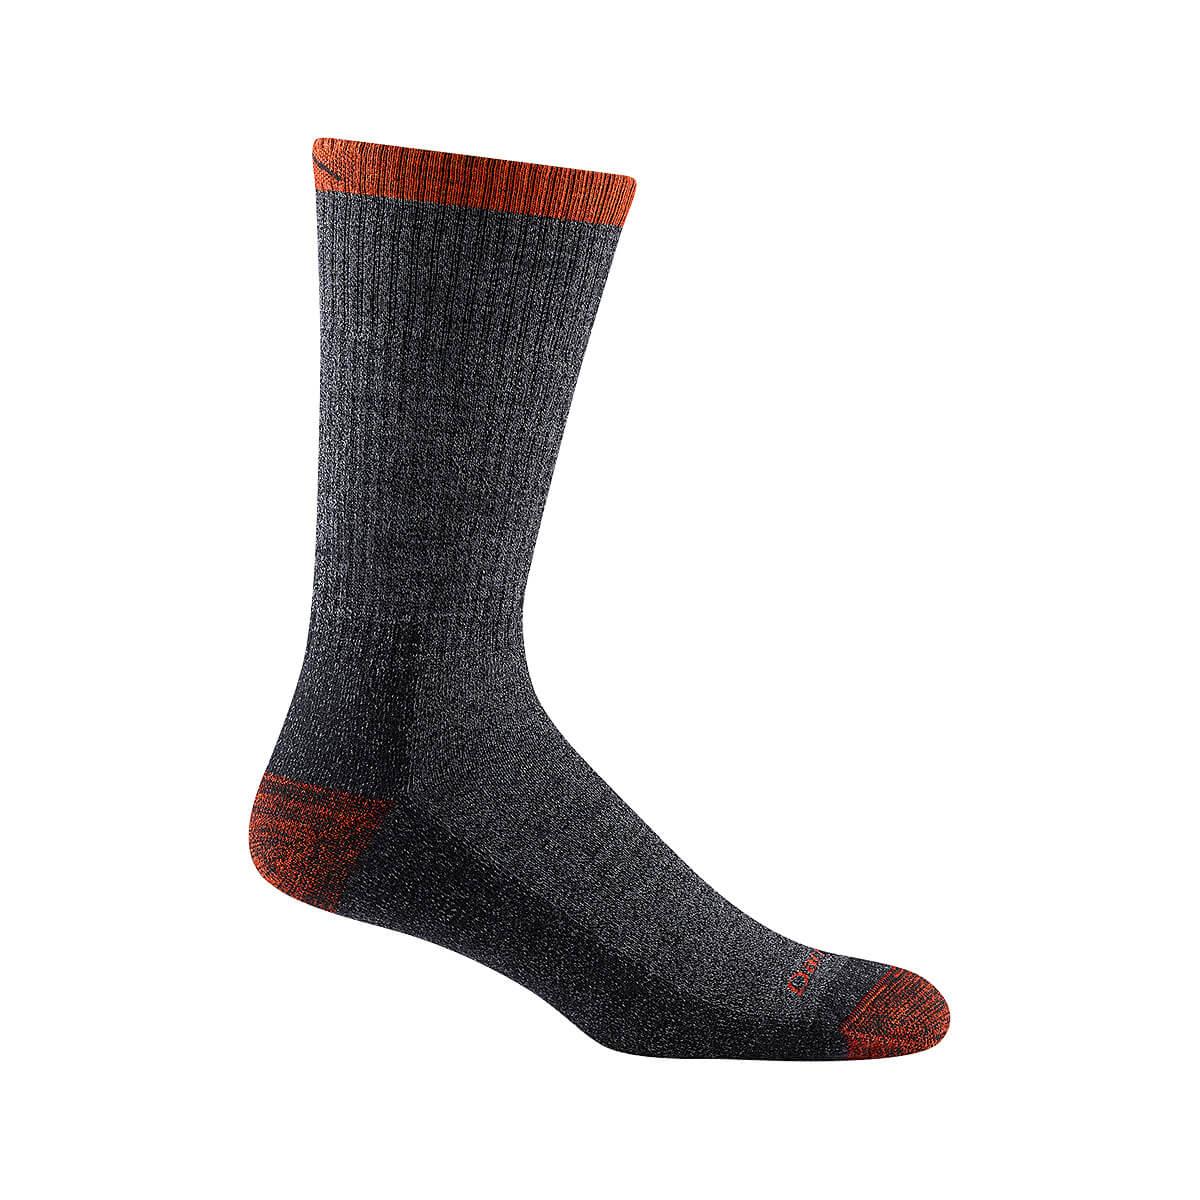  Men's Nomad Boot Midweight Hiking Socks